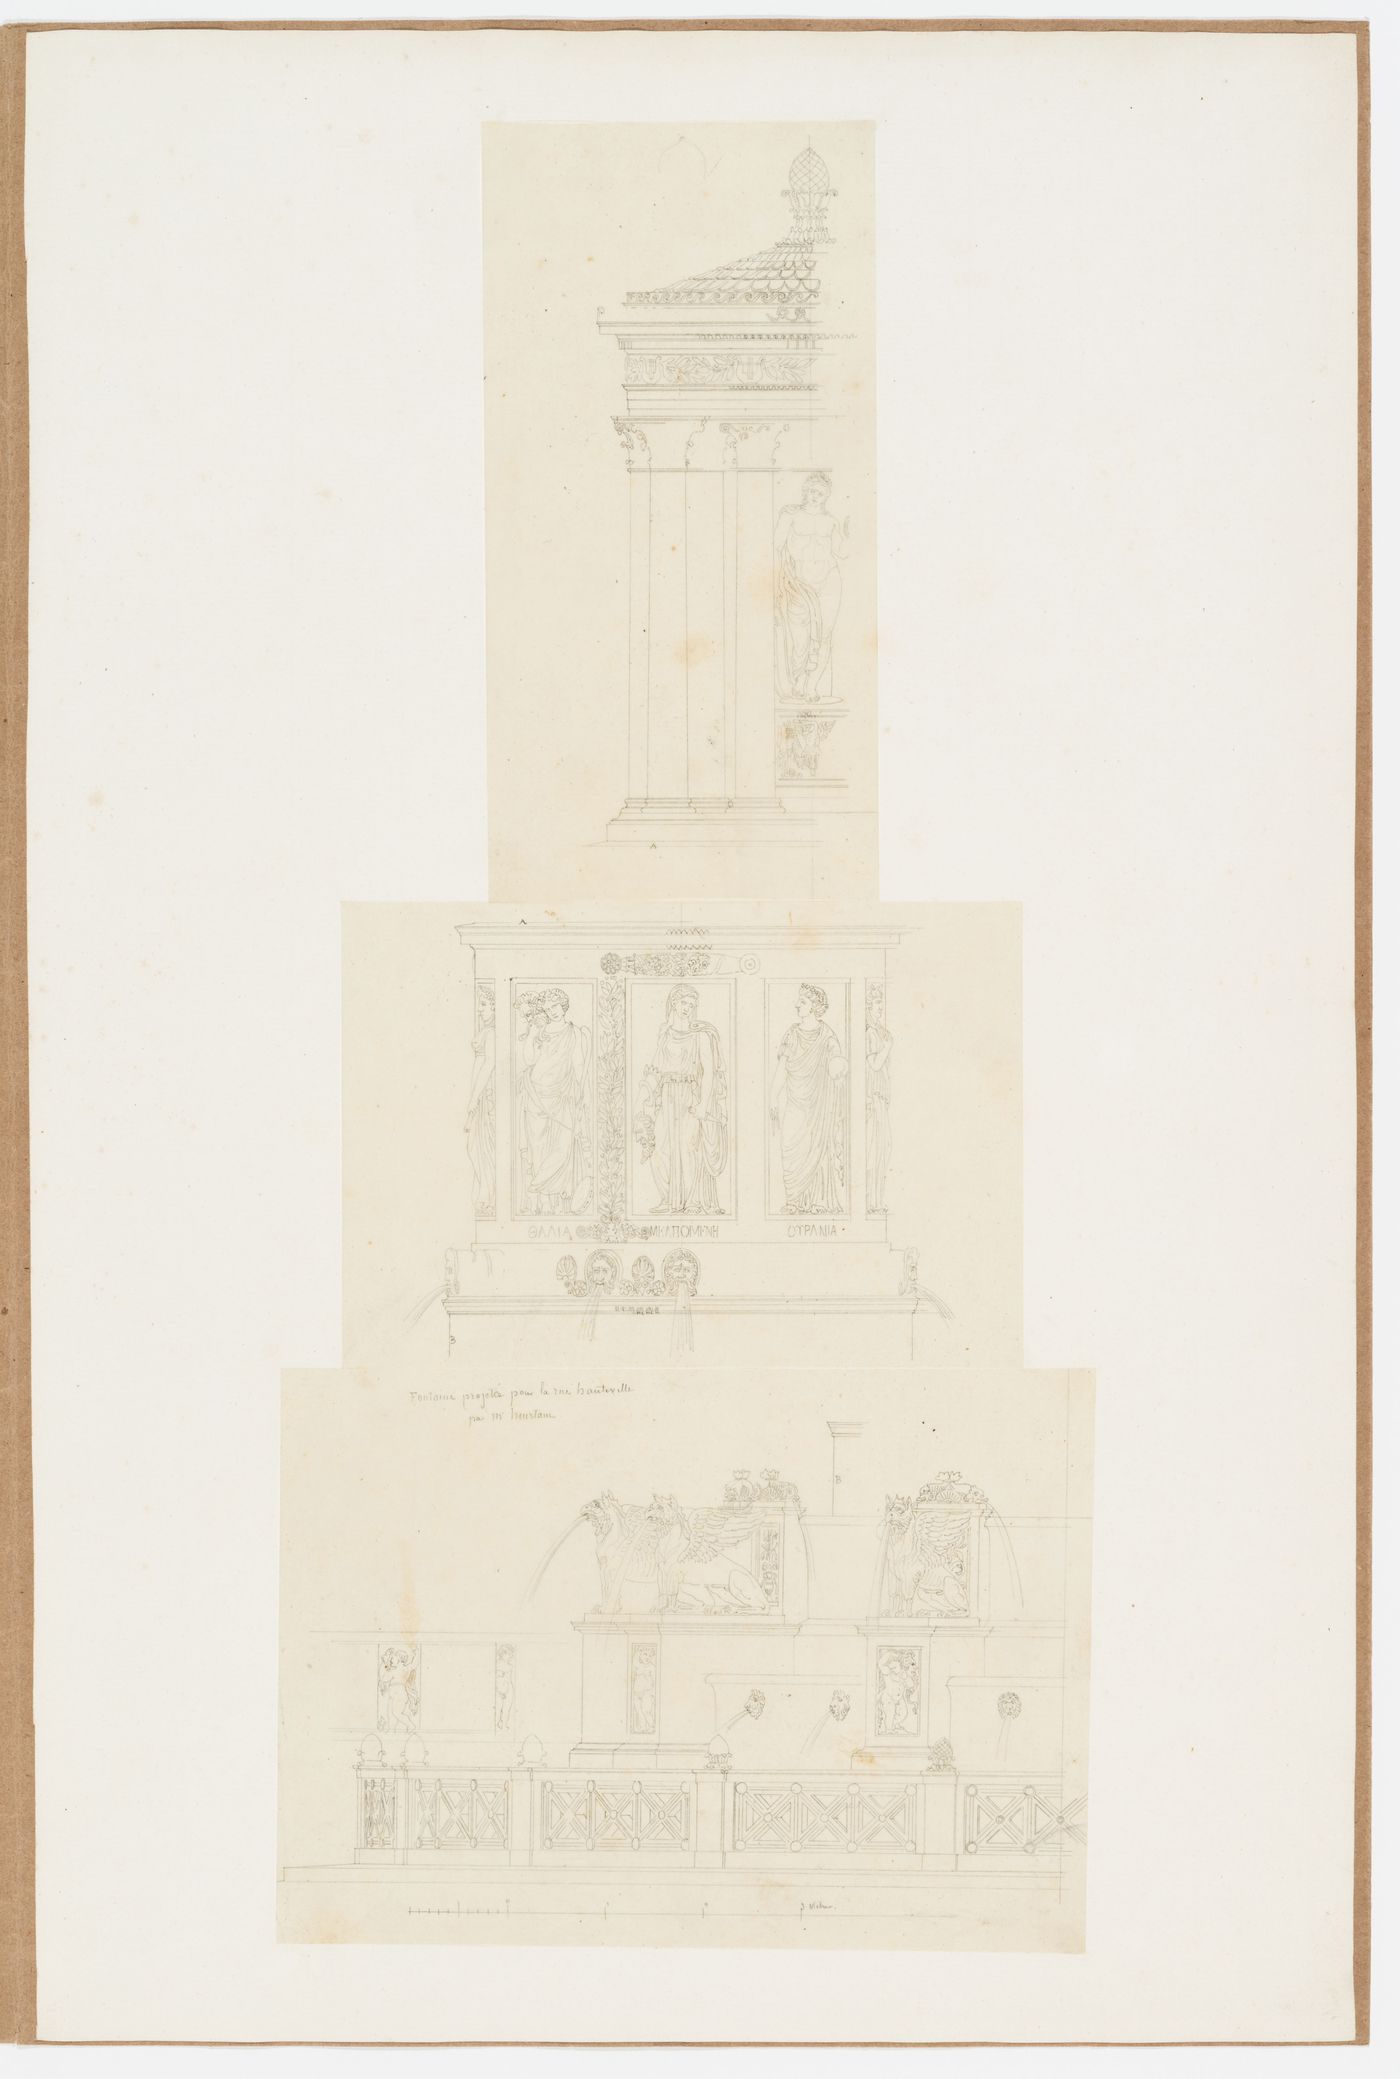 Partial exterior elevation of a fountain planned for rue hauteville, Paris, after Mr. Hurtault